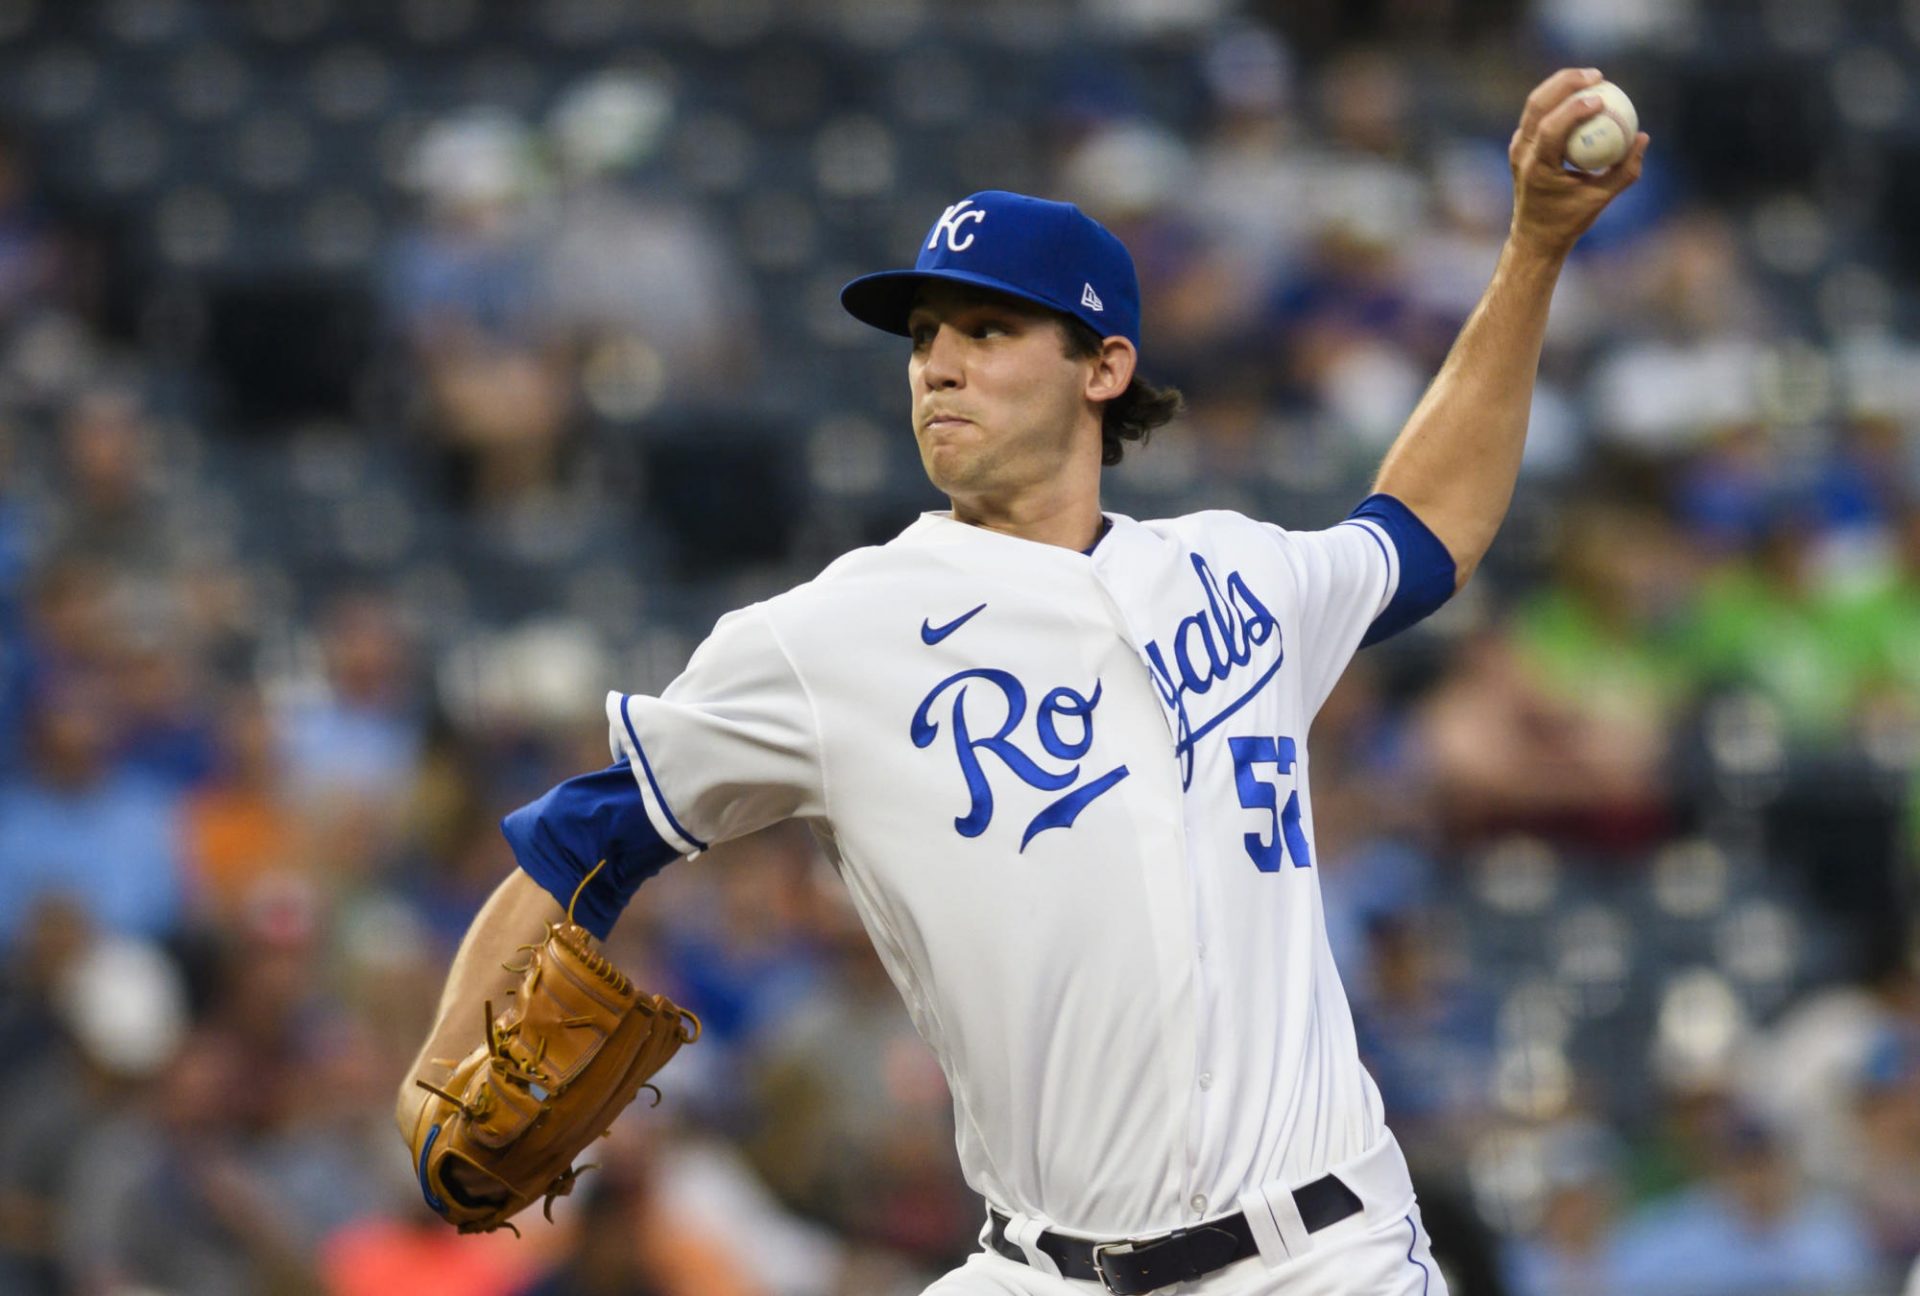 Lynch shuts down Astros for 7 innings as Royals gain 3-1